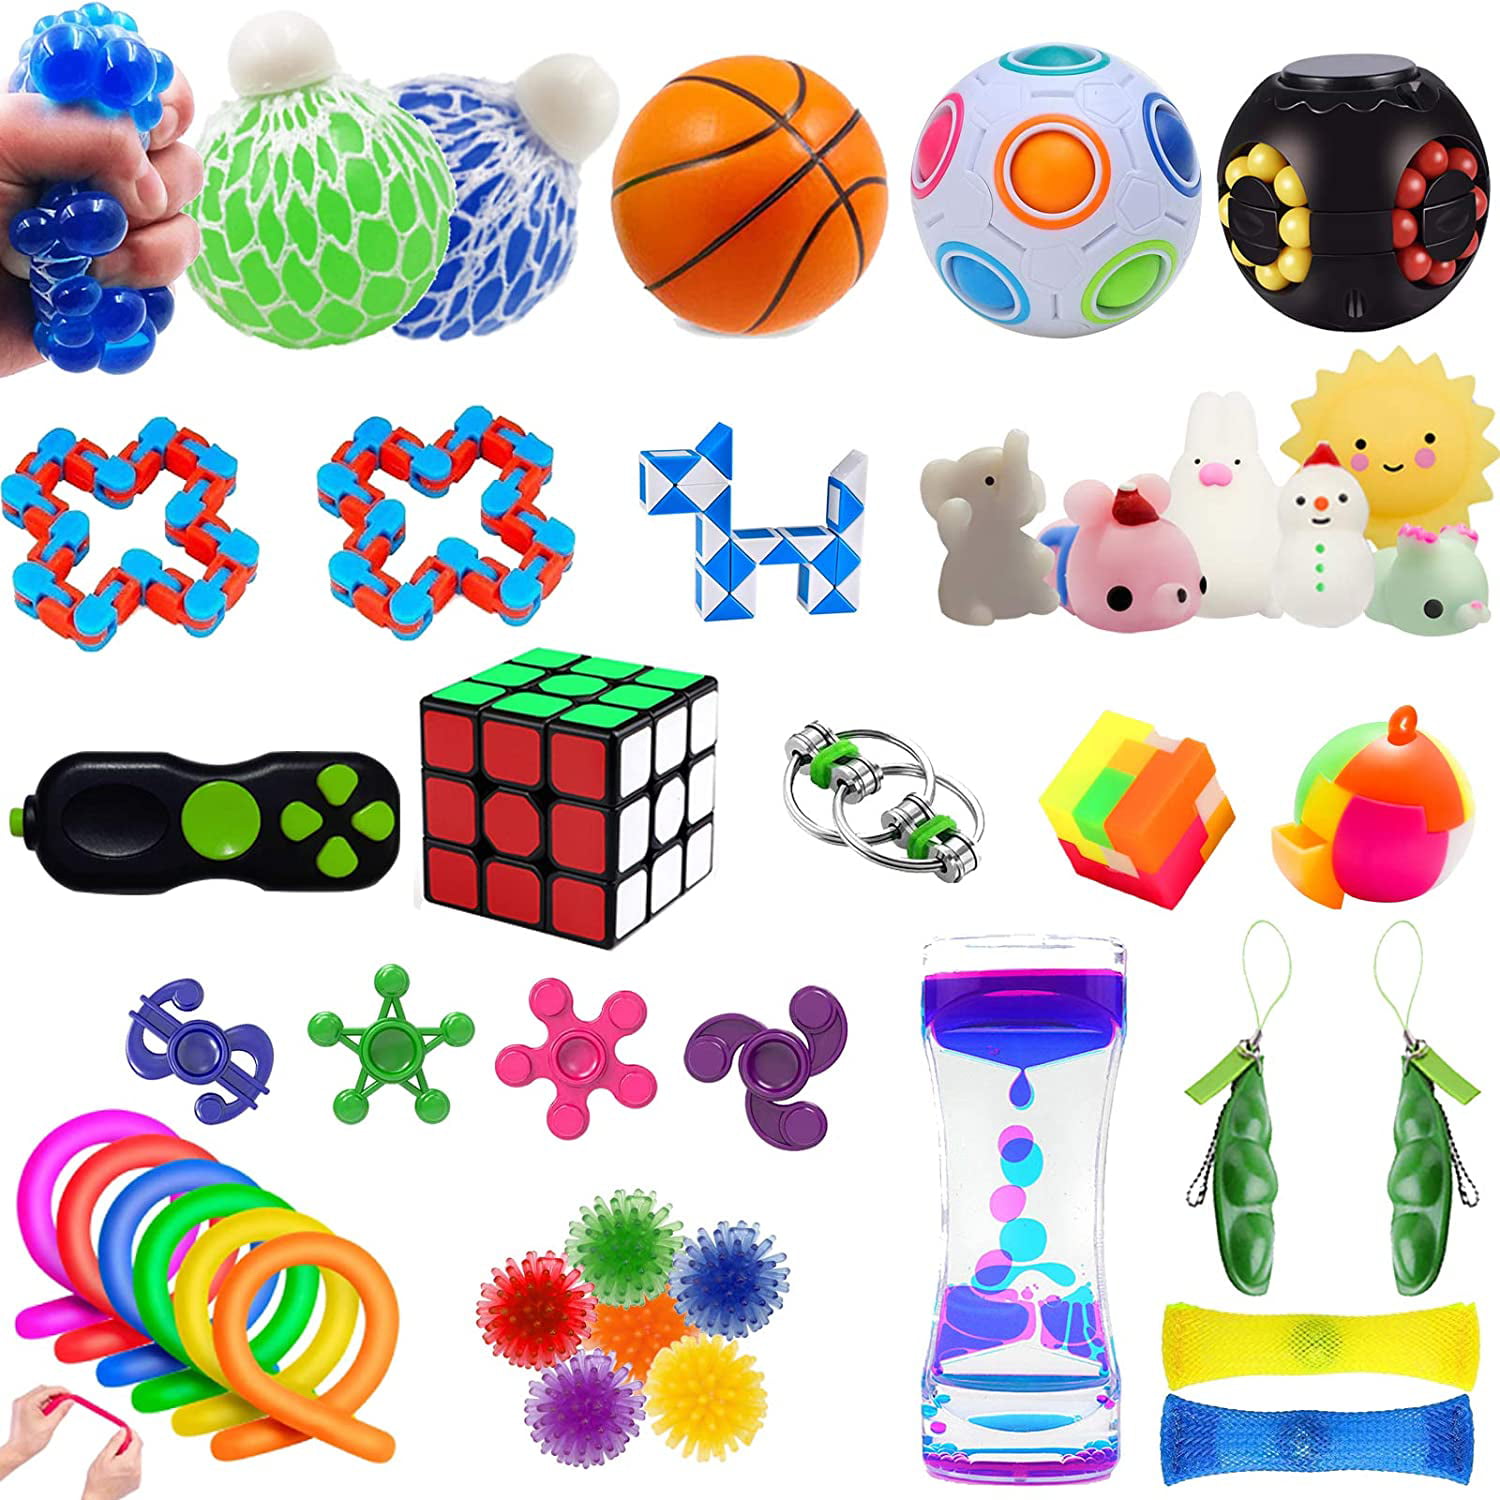 Details about   7PC Figet Fidget Toy Anti Stress Anxiety Toy Set Adults Kids Autism Finger Toy 